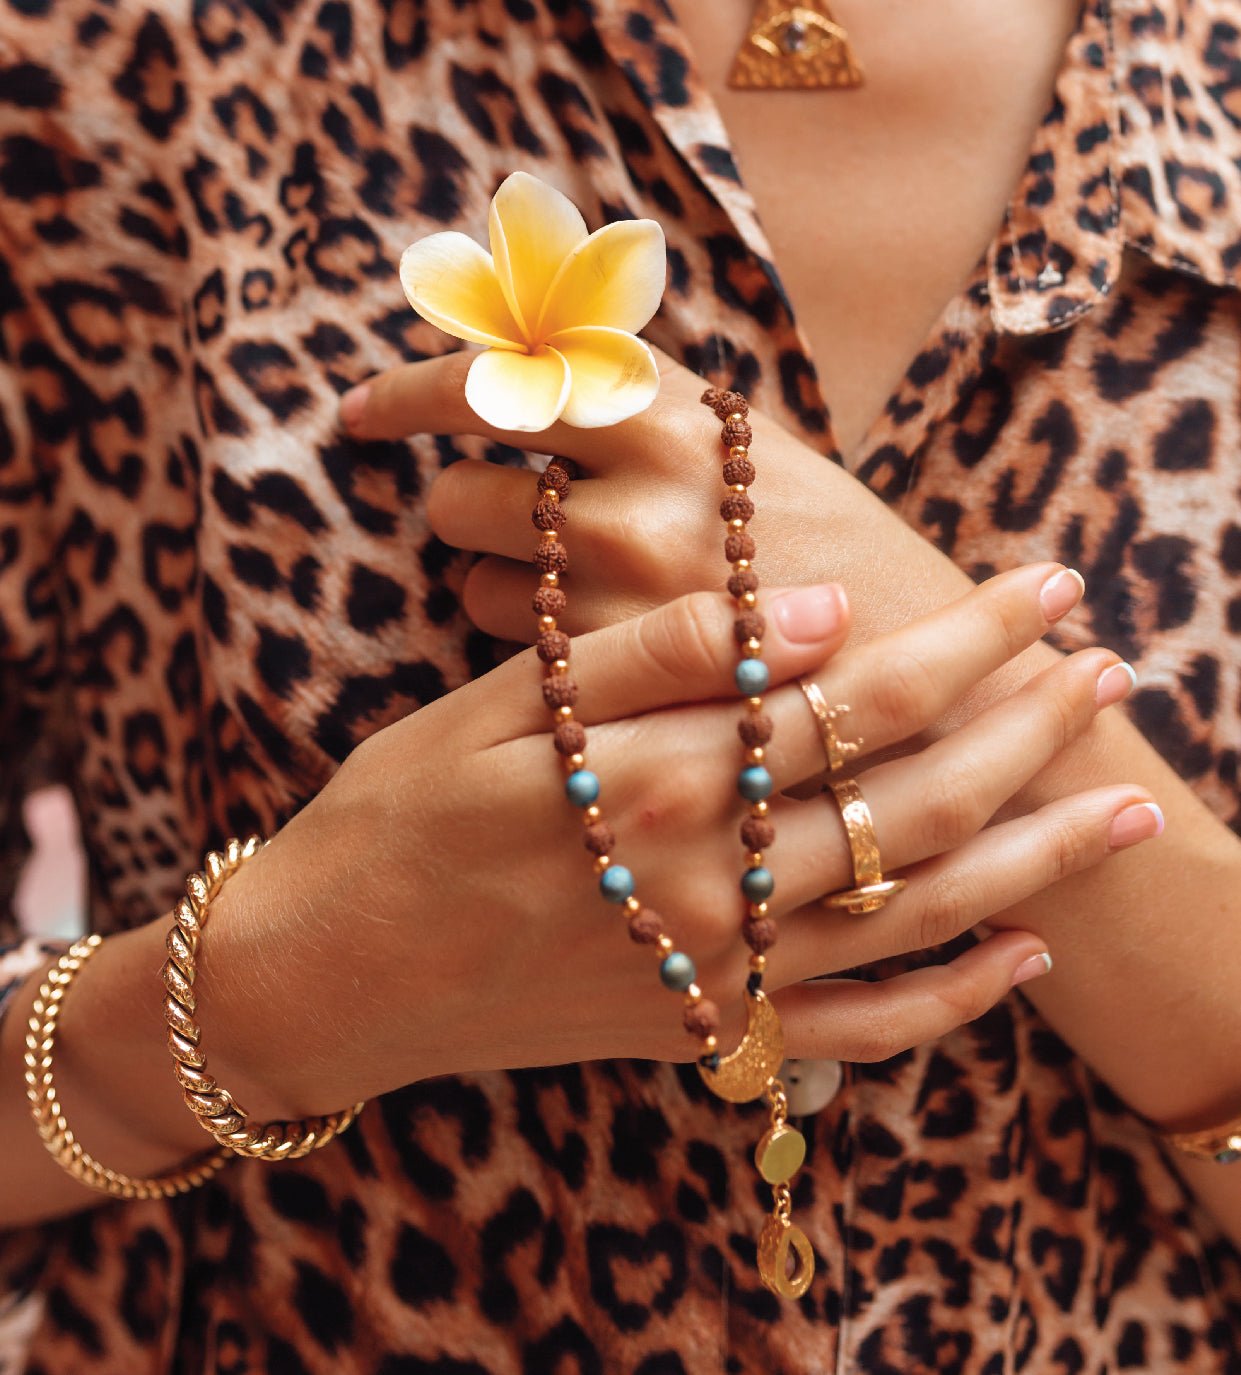 The CHANDRA MALA Necklace - The World Of Indah